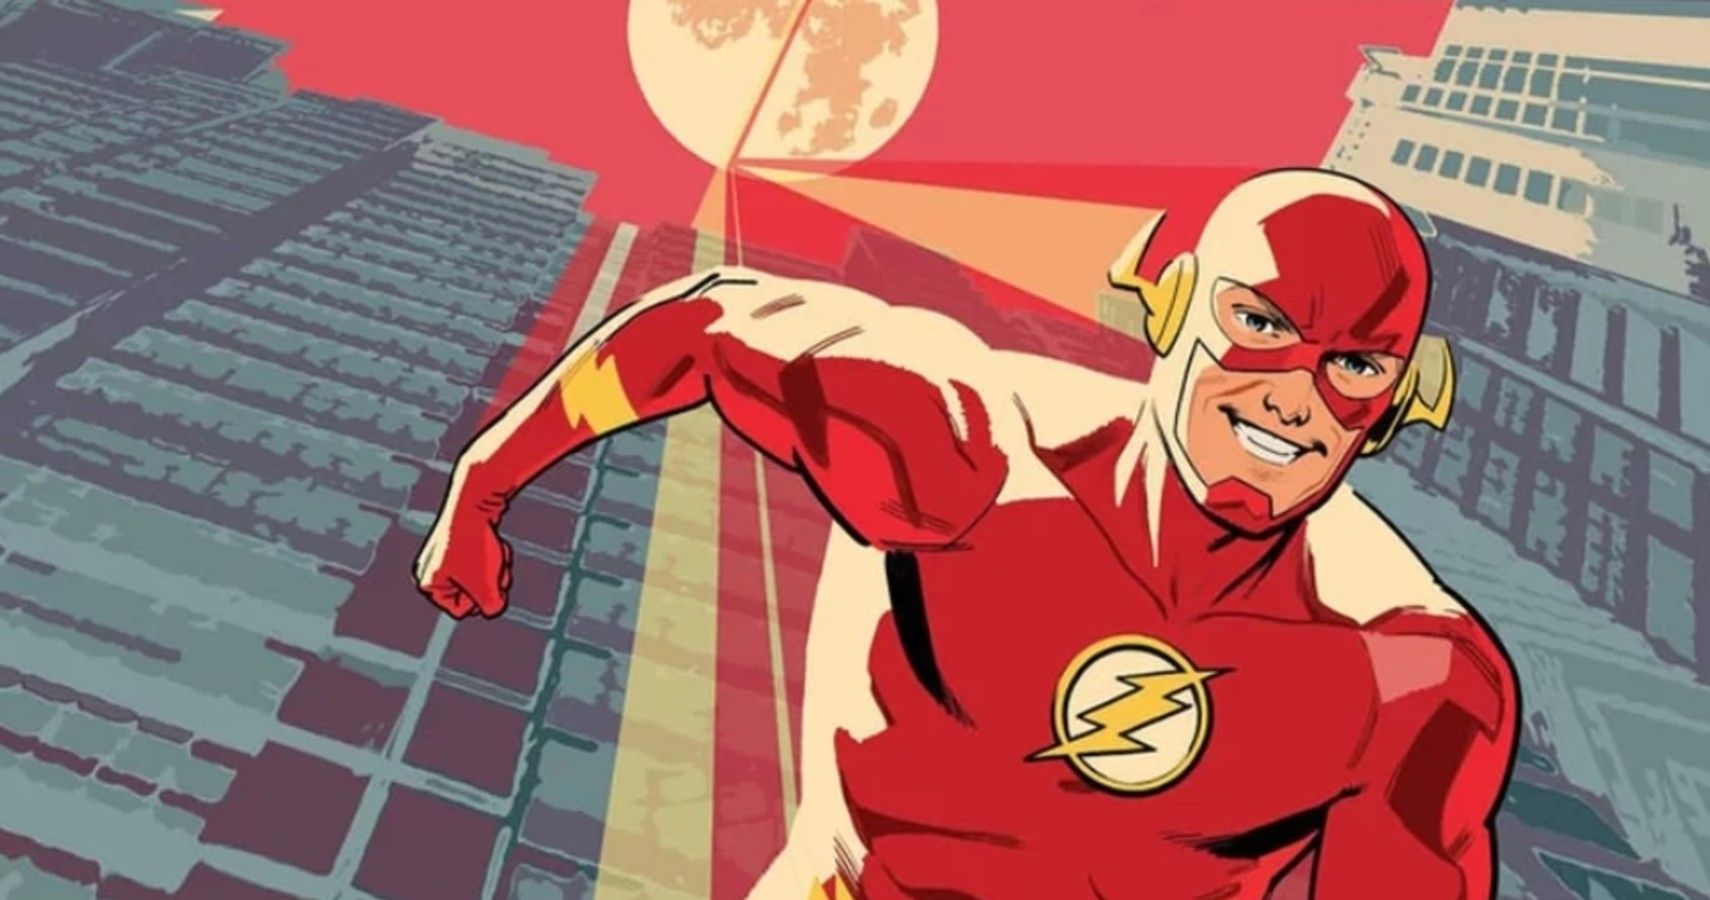 10 Things The Flash Should Do With His Powers (But Doesn't)